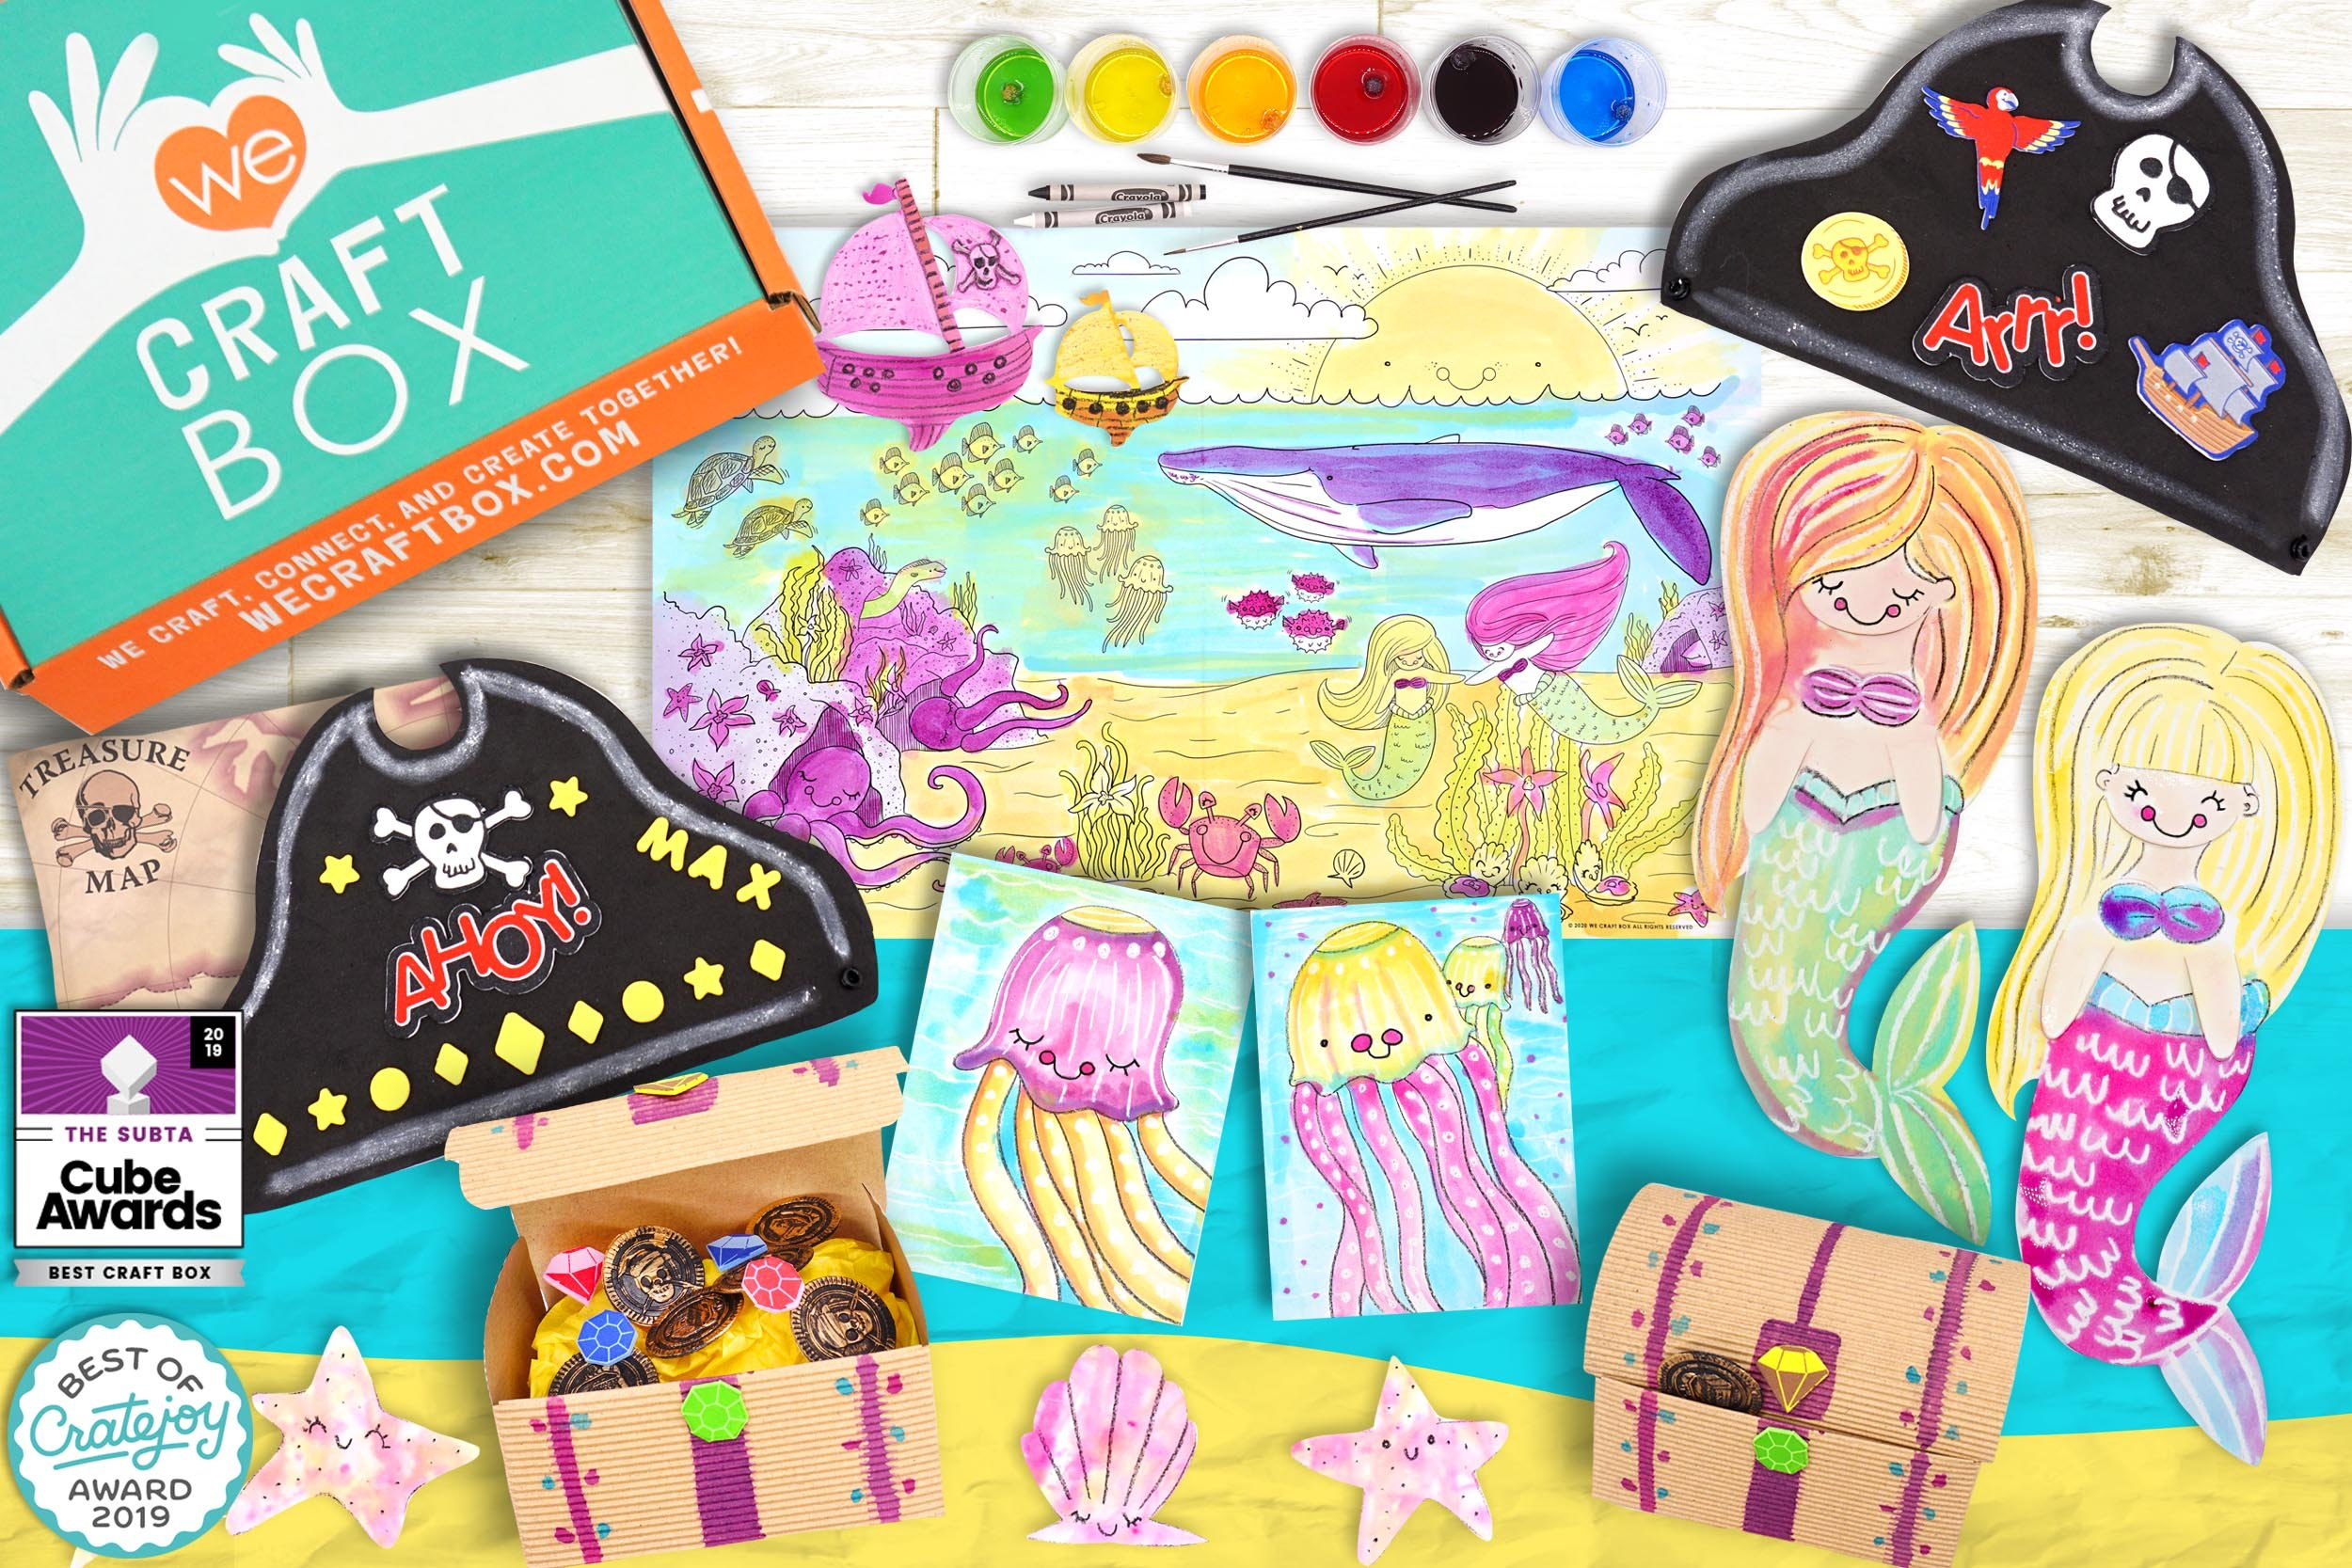 We Craft Box January 2021 Spoilers + Coupon! - Hello Subscription